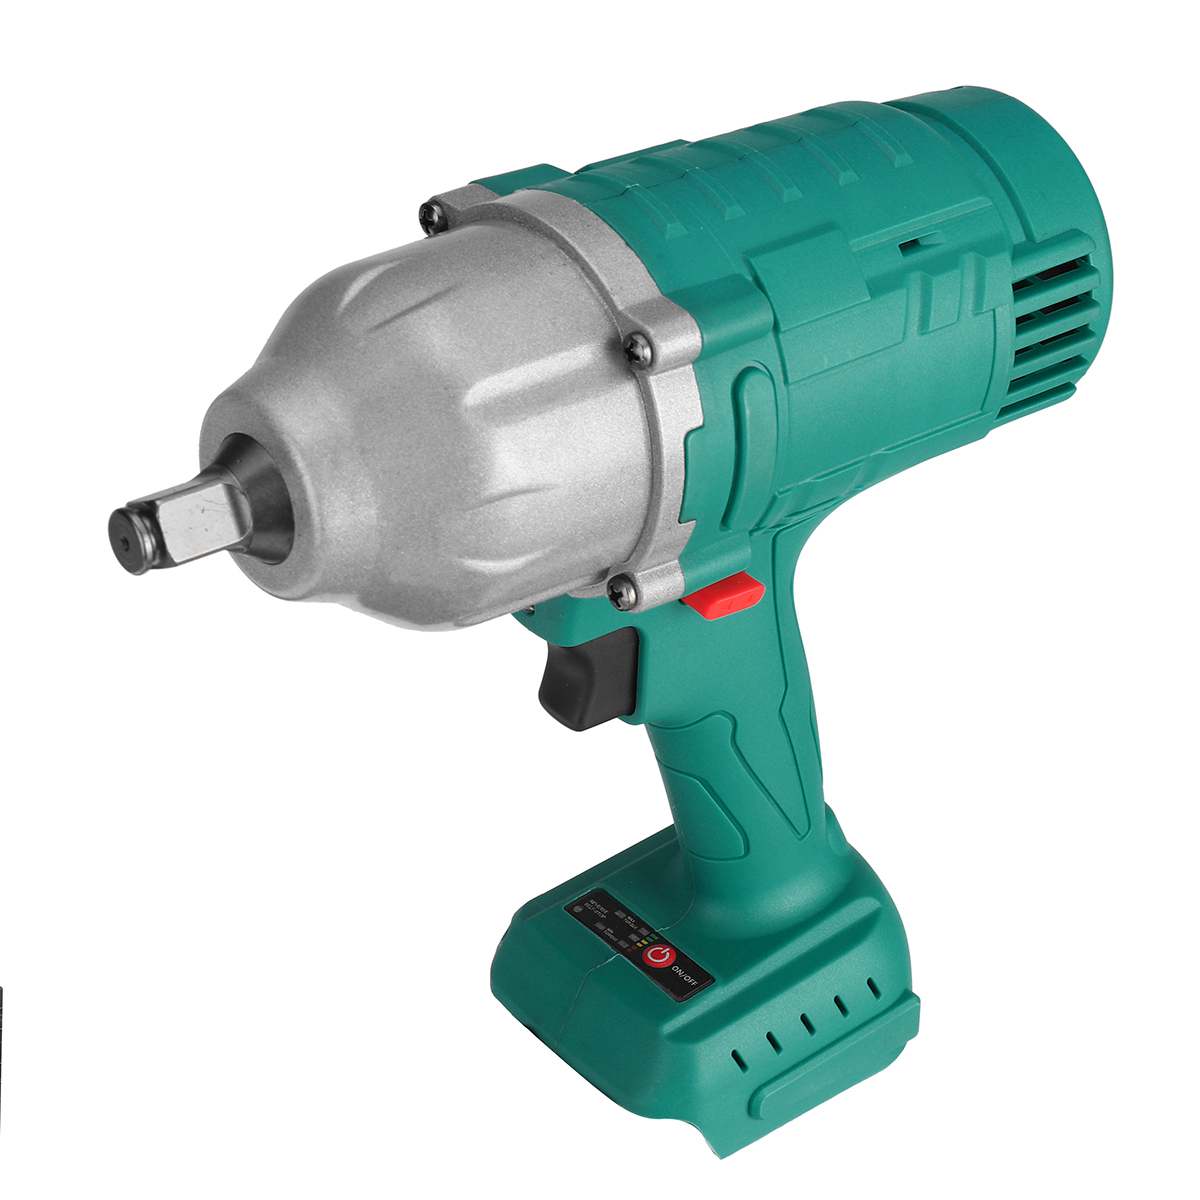 Find BLMIATKO 18V 1900N.m Electric Brushless Impact Wrench Rechargeable Woodworking Maintenance Tool for Sale on Gipsybee.com with cryptocurrencies